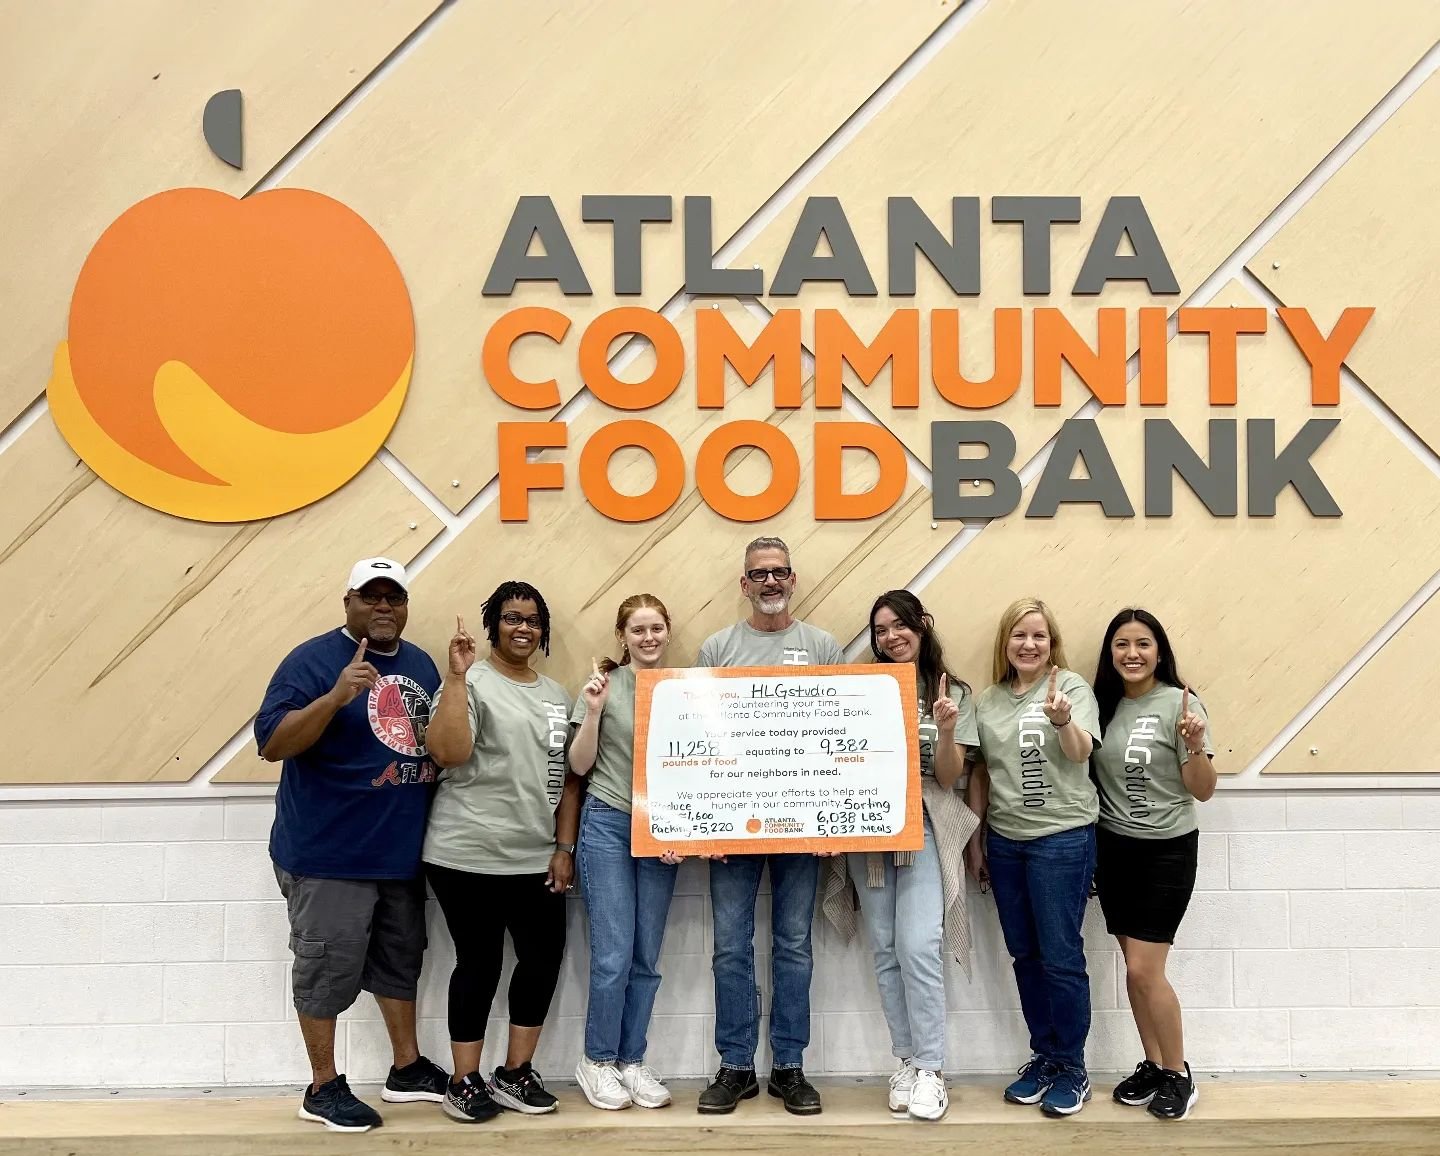 The HLGstudio squad brought their 🅰️-game to the Atlanta Community Food Bank! Everyone lent a helping hand, spreading smiles, and dishing out support to make a difference to those in need. Way to go, team!